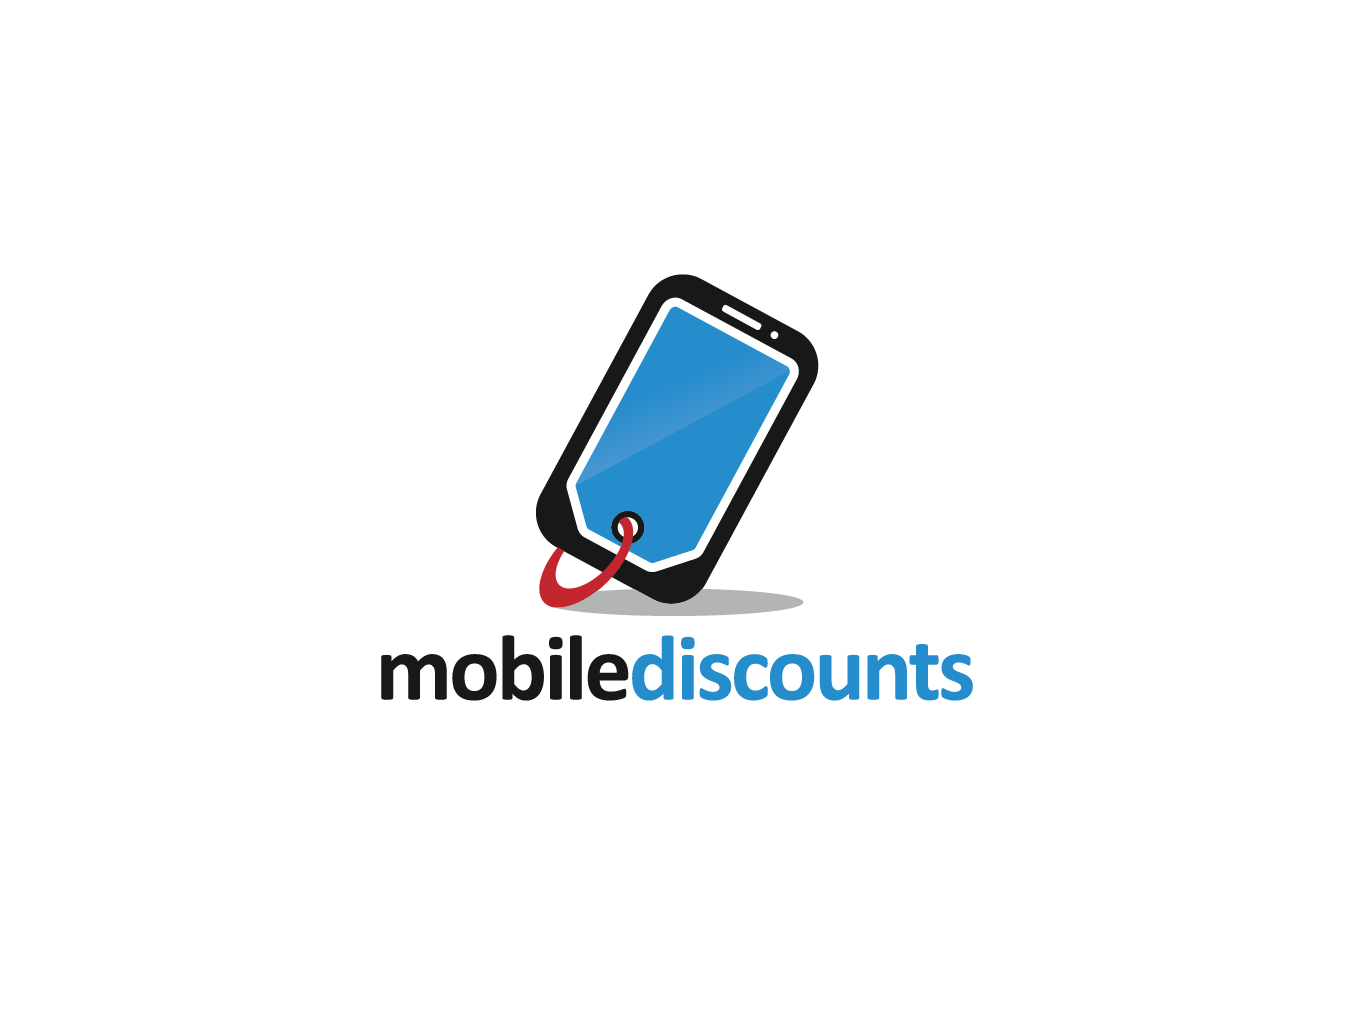 Logo Design Mobile Discounts By Simplepixel On Dribbble